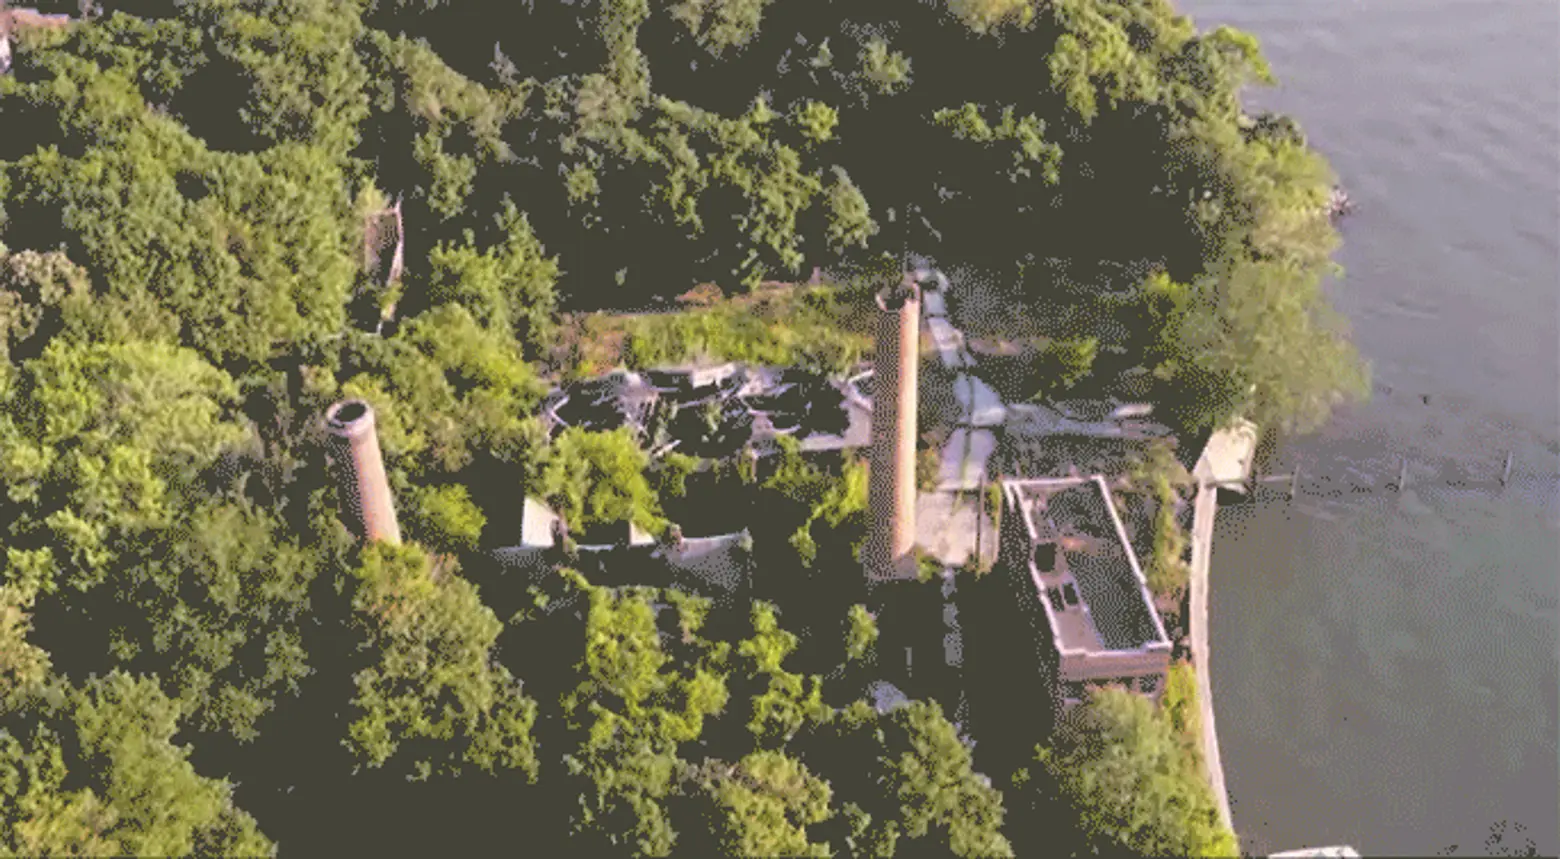 VIDEO: Drone Footage Shows Rare Views of North Brother Island’s Abandoned Buildings